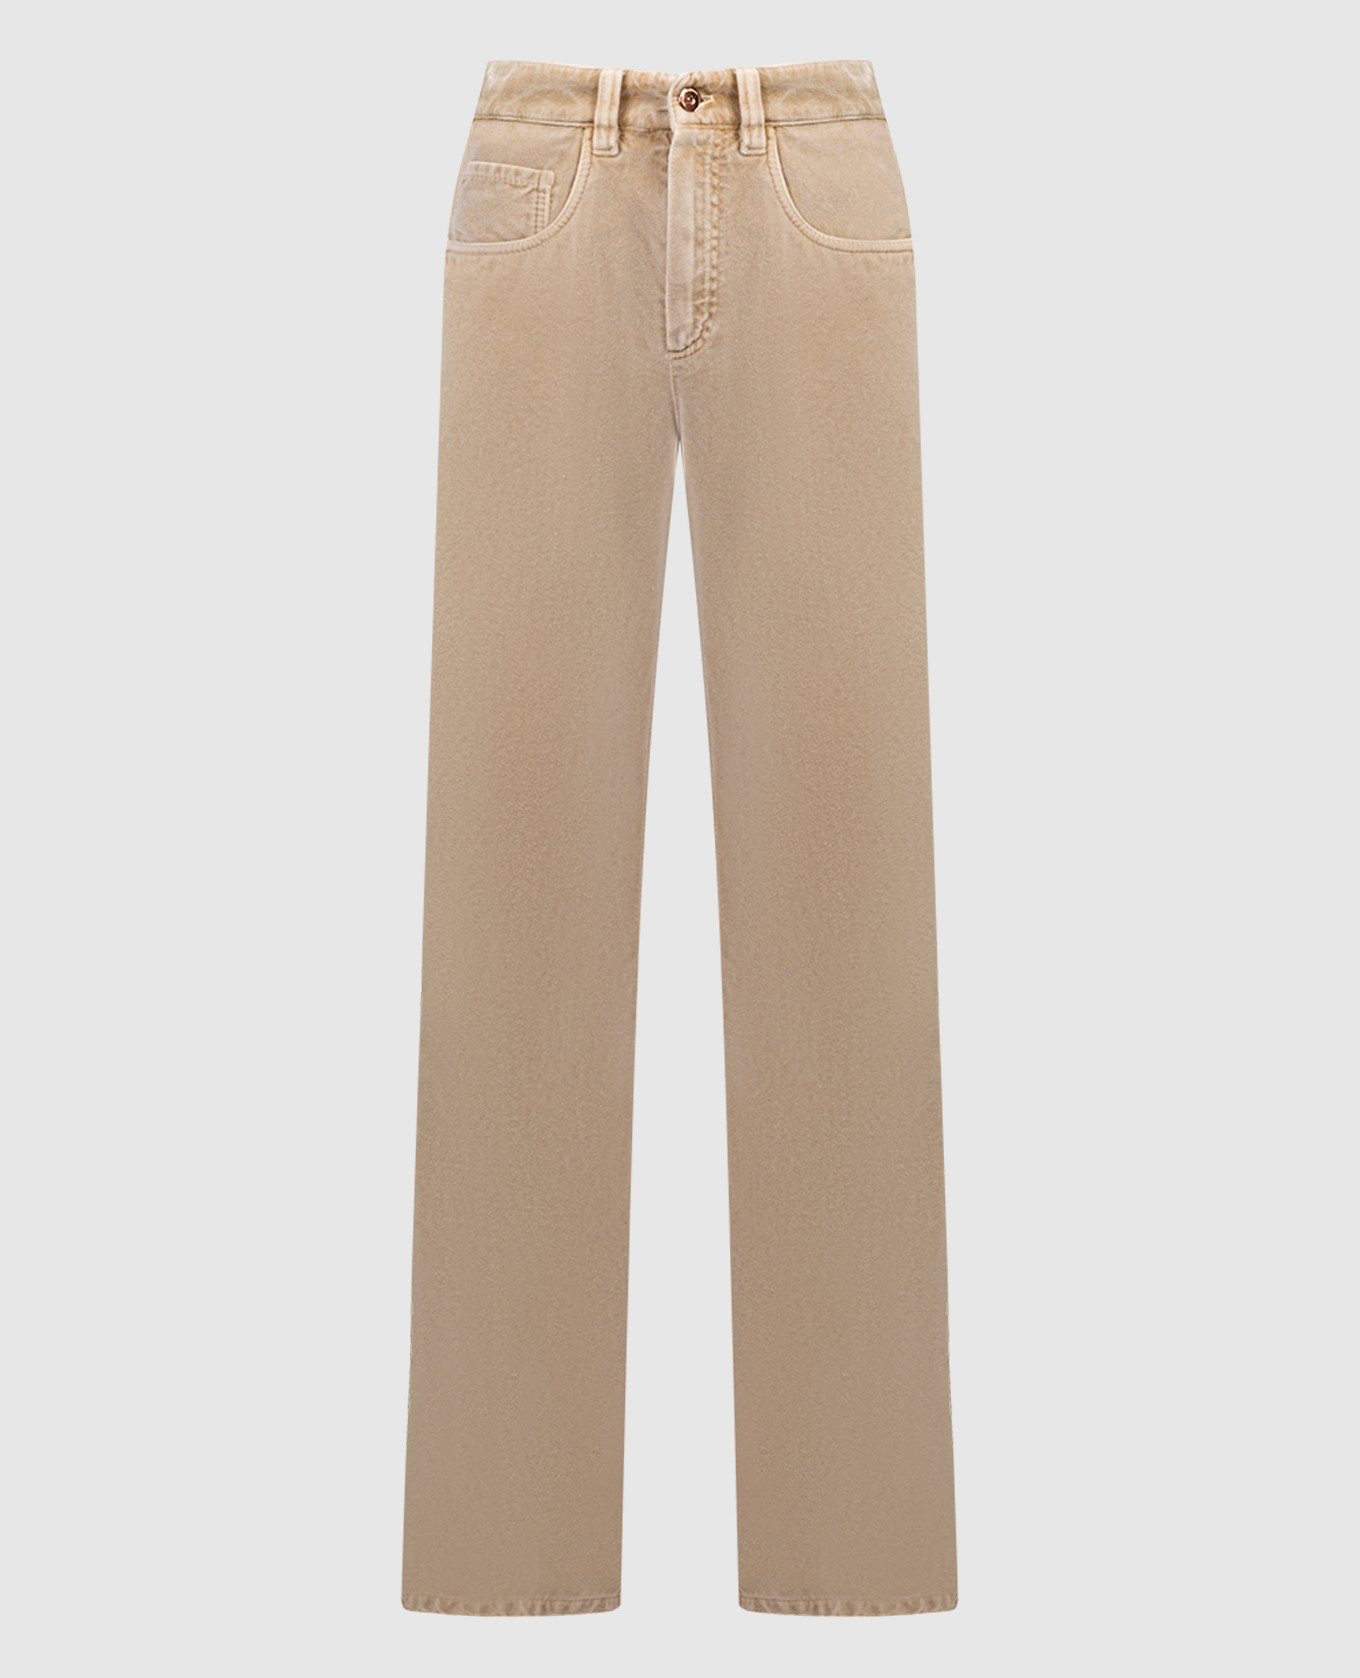 Beige velvet trousers with monil chain and logo patch